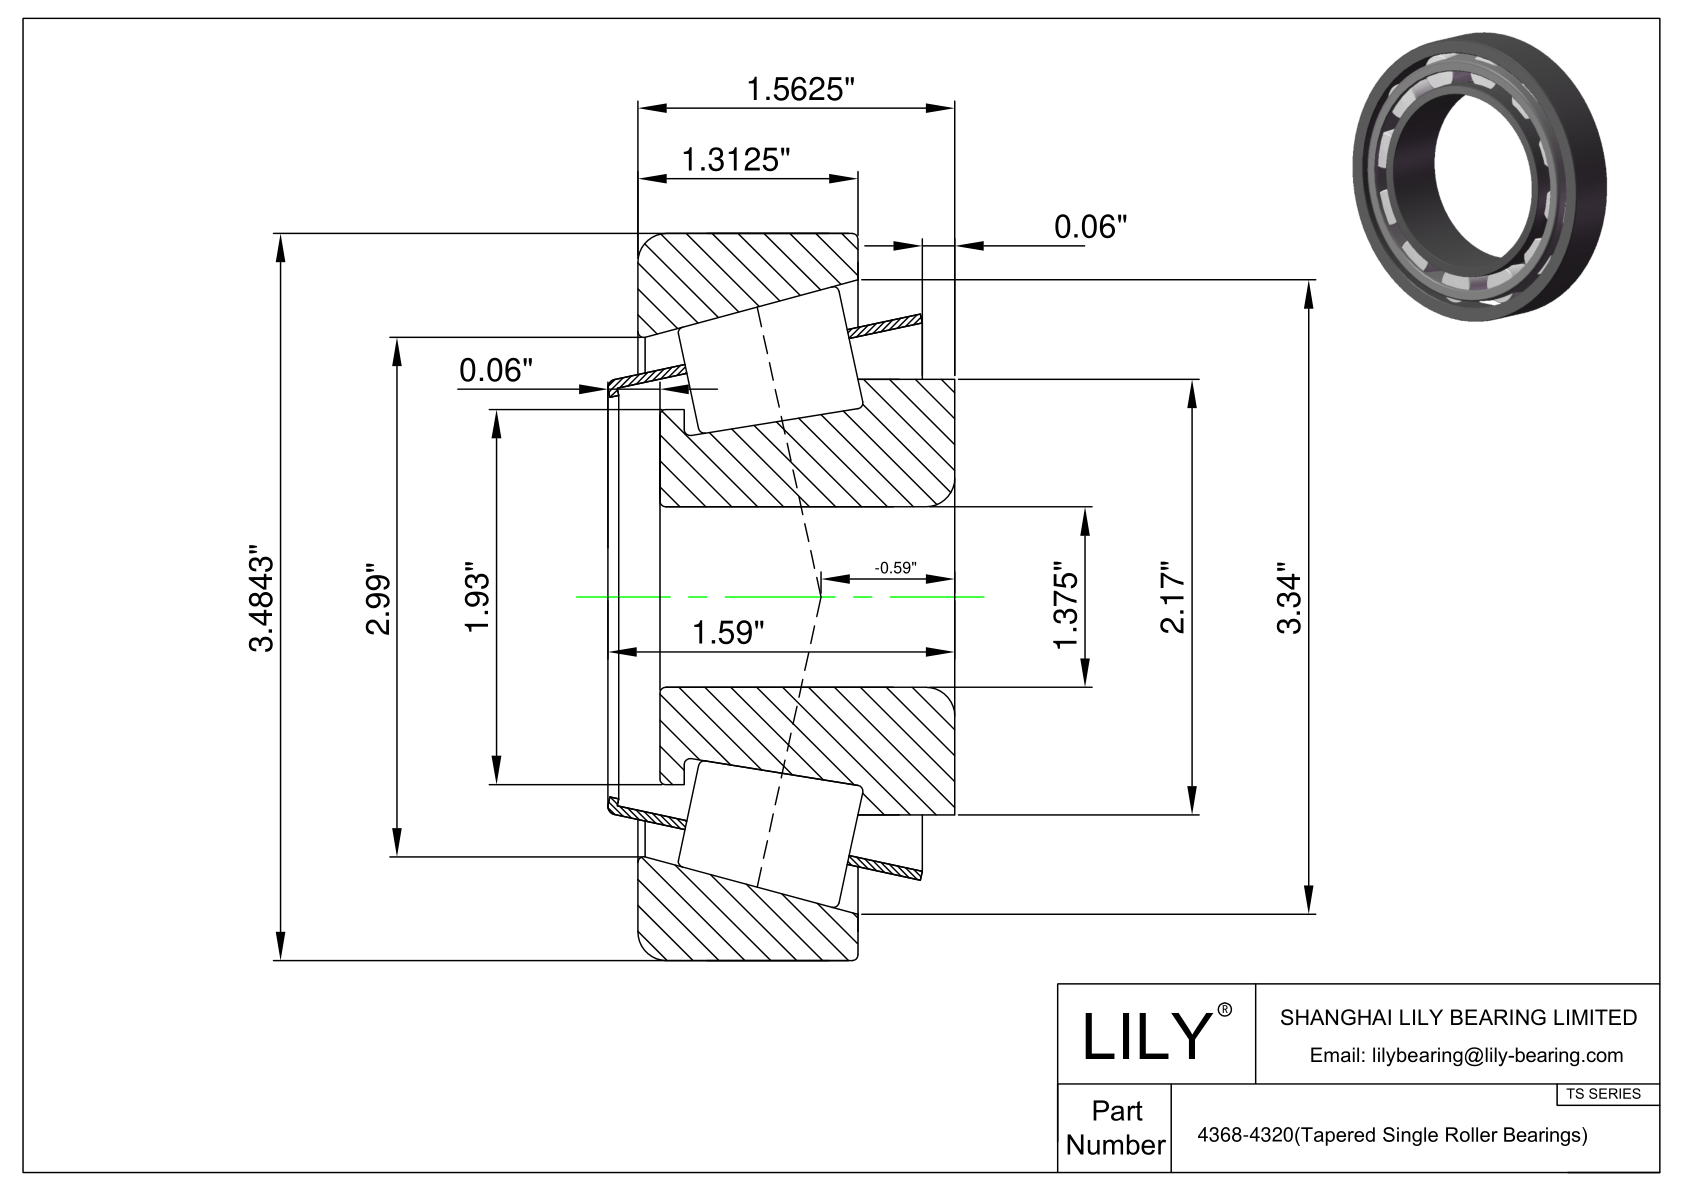 4368-4320 TS (Tapered Single Roller Bearings) (Imperial) cad drawing